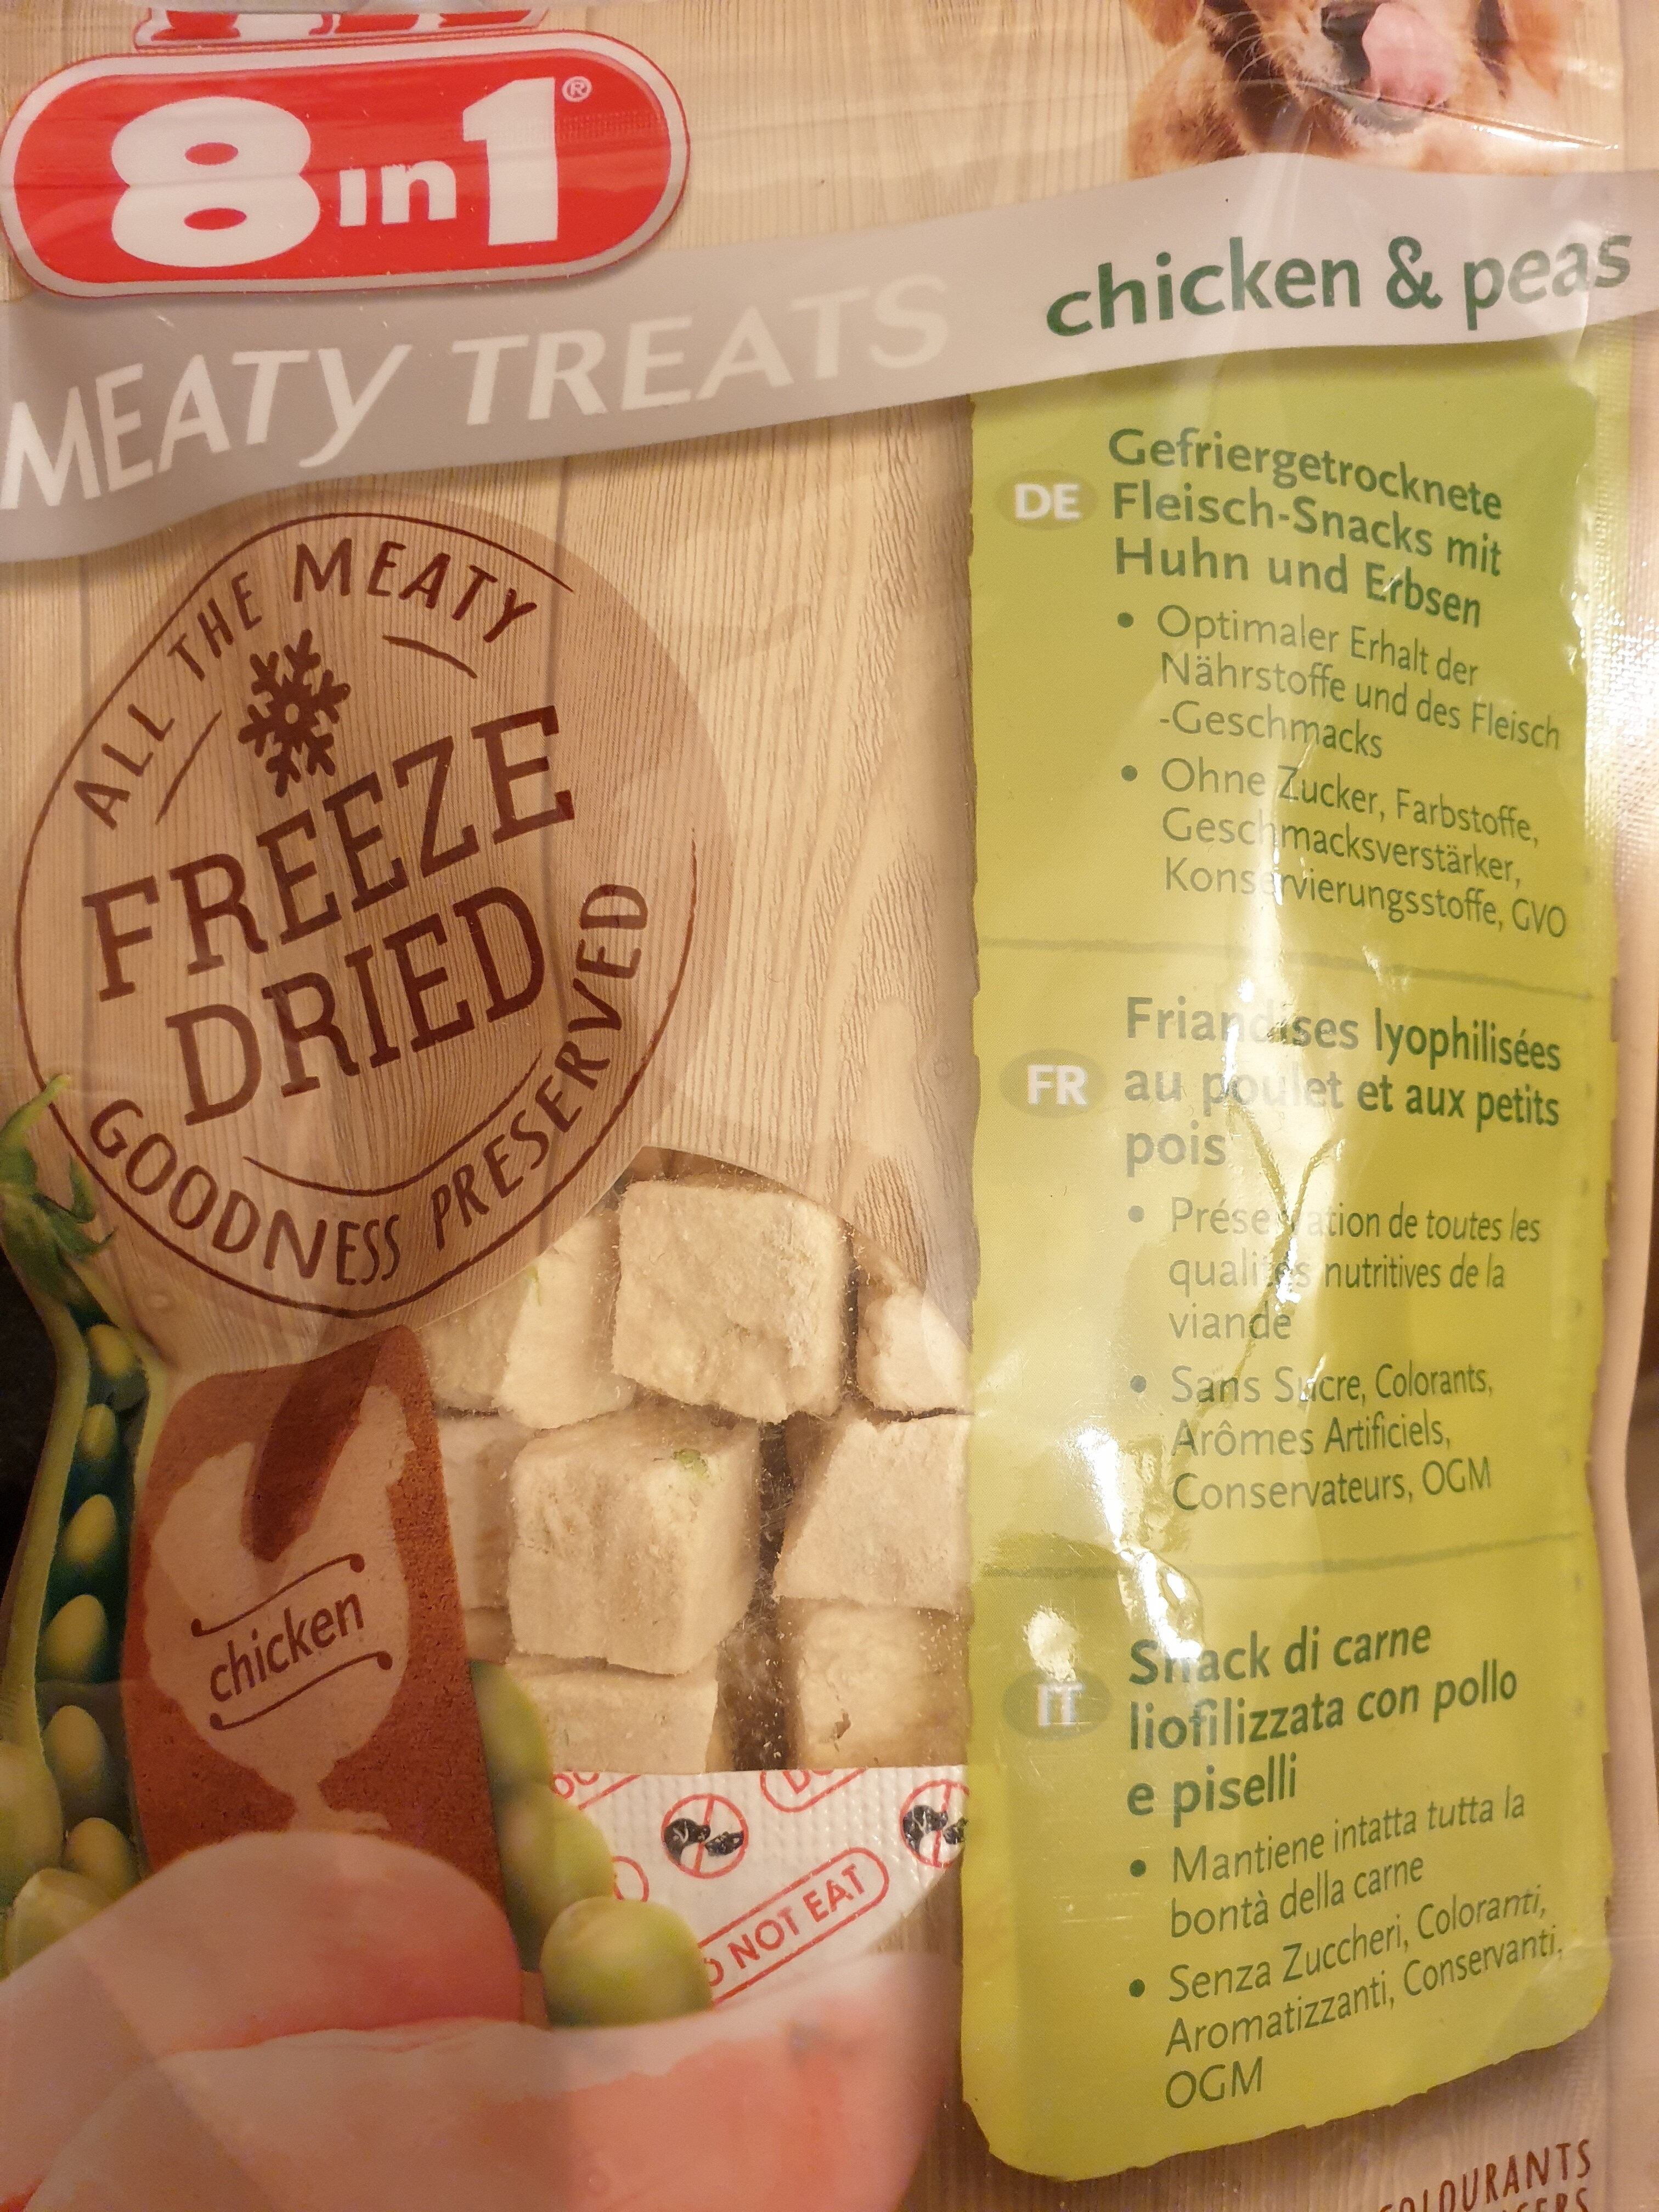 meaty treats - chicken and peas - Product - fr